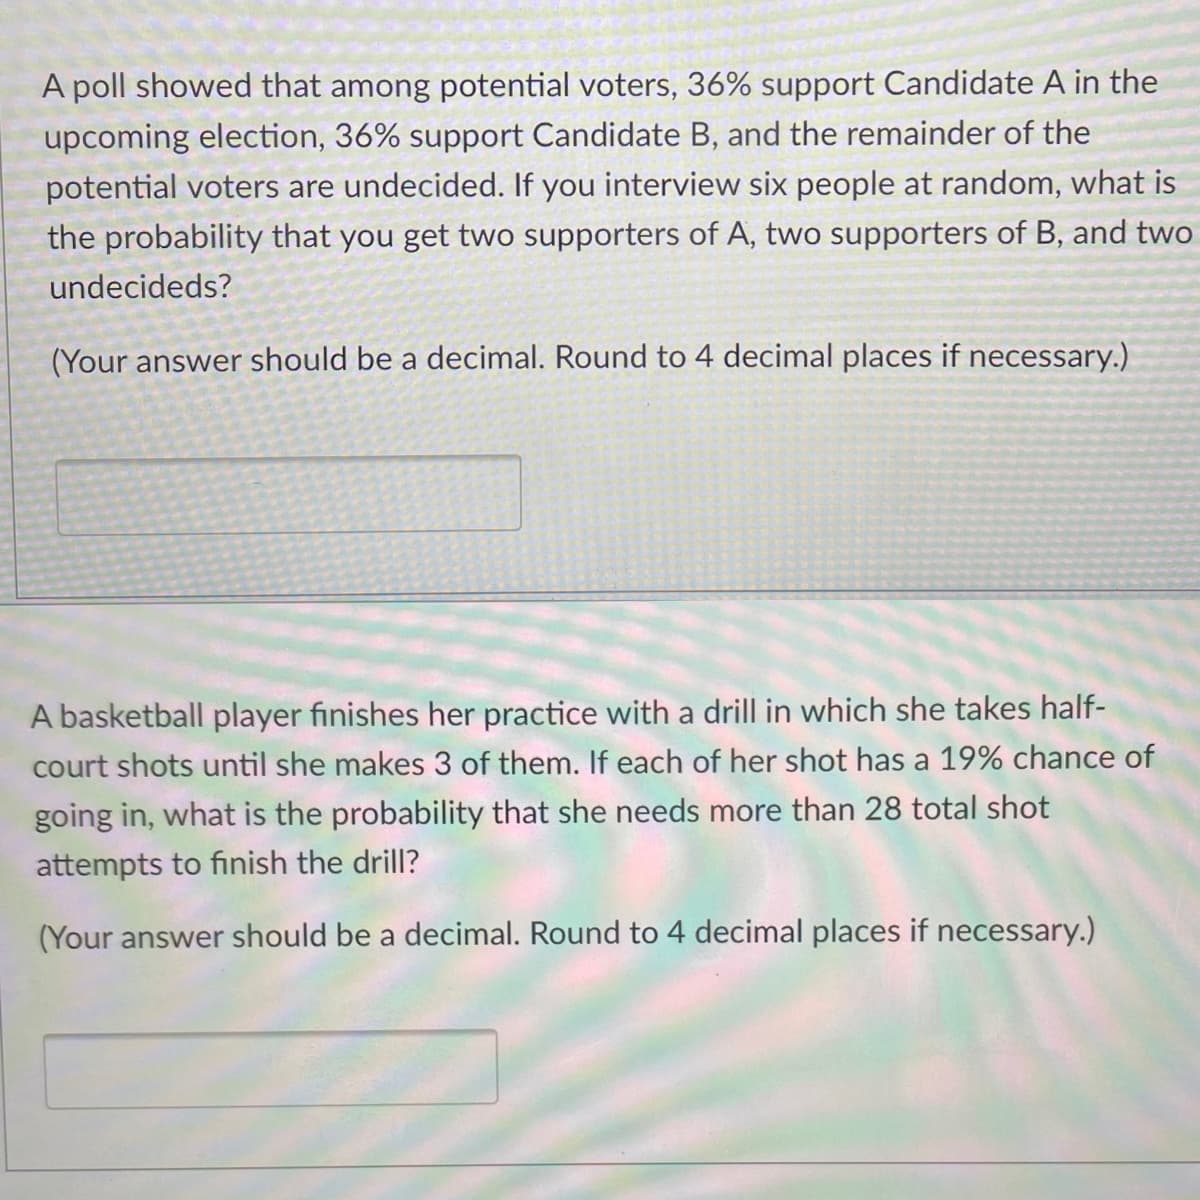 A poll showed that among potential voters, 36% support Candidate A in the
upcoming election, 36% support Candidate B, and the remainder of the
potential voters are undecided. If you interview six people at random, what is
the probability that you get two supporters of A, two supporters of B, and two
undecideds?
(Your answer should be a decimal. Round to 4 decimal places if necessary.)
A basketball player finishes her practice with a drill in which she takes half-
court shots until she makes 3 of them. If each of her shot has a 19% chance of
going in, what is the probability that she needs more than 28 total shot
attempts to finish the drill?
(Your answer should be a decimal. Round to 4 decimal places if necessary.)
